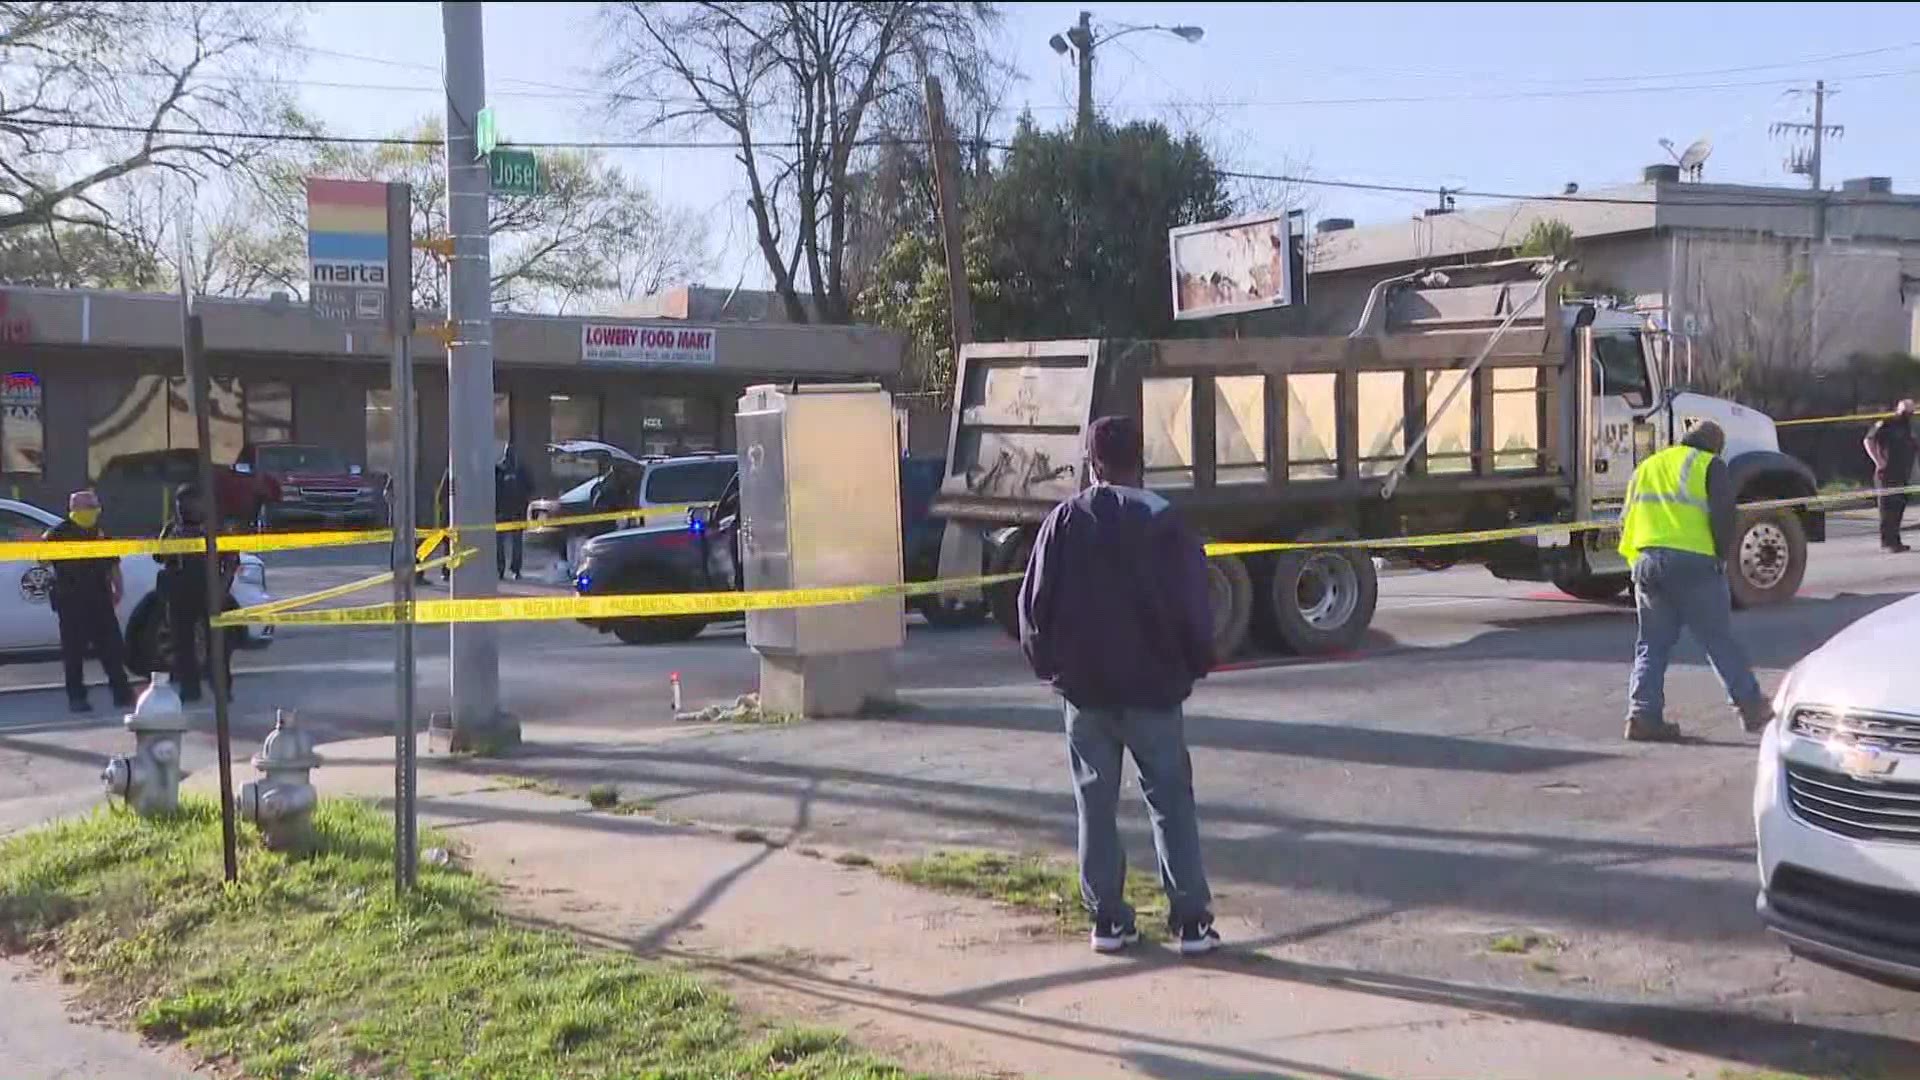 Atlanta Police are investigating after a woman was struck and killed by a truck on a busy Atlanta road on Saturday afternoon.